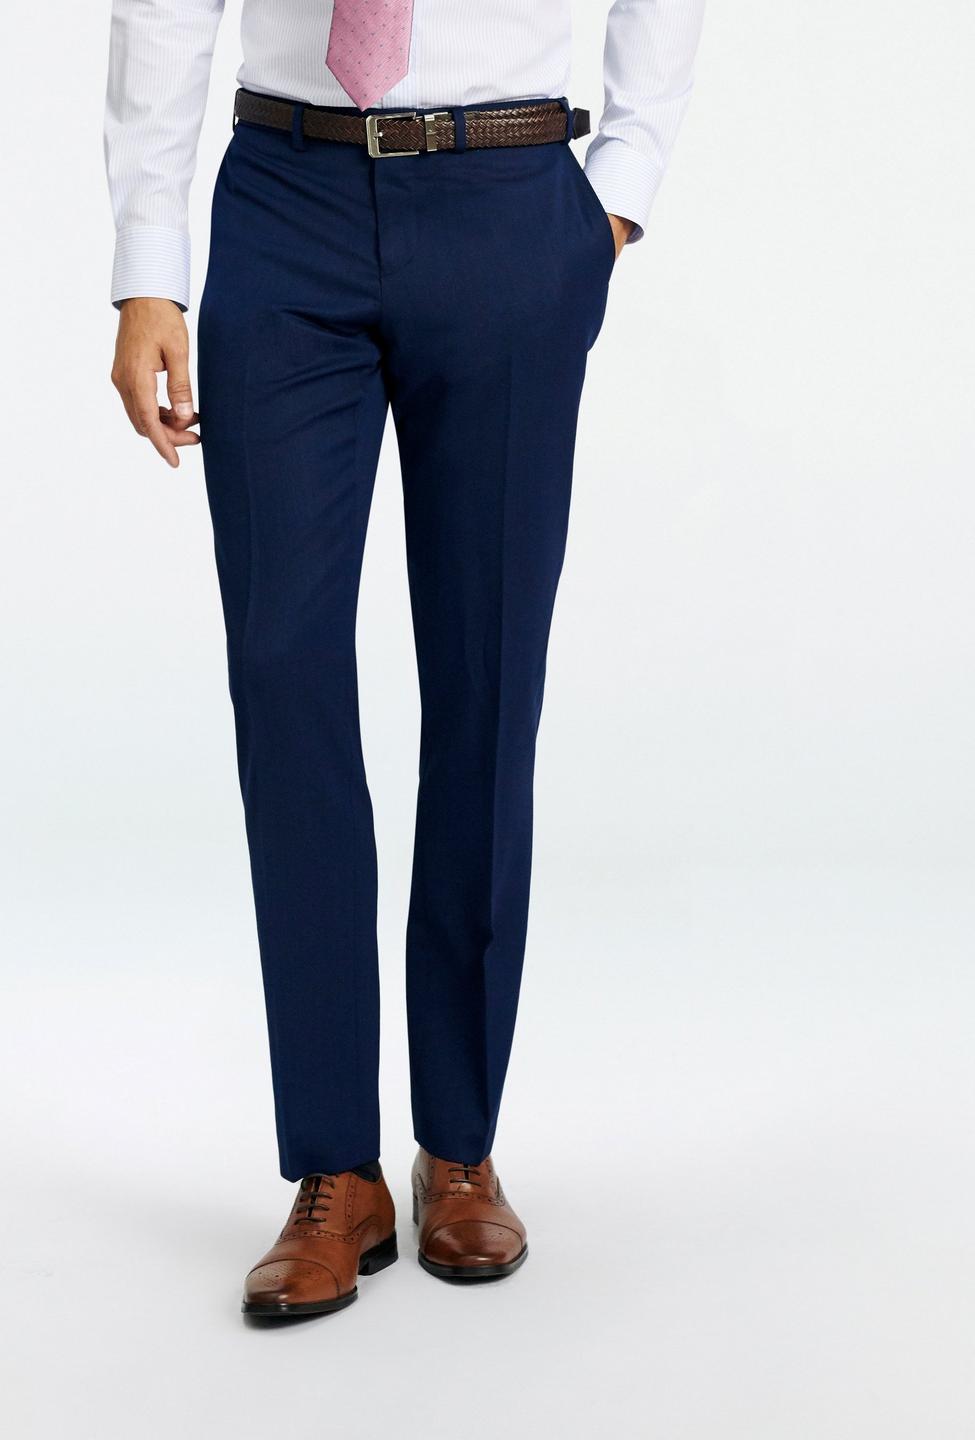 Blue pants - Hereford Solid Design from Premium Indochino Collection